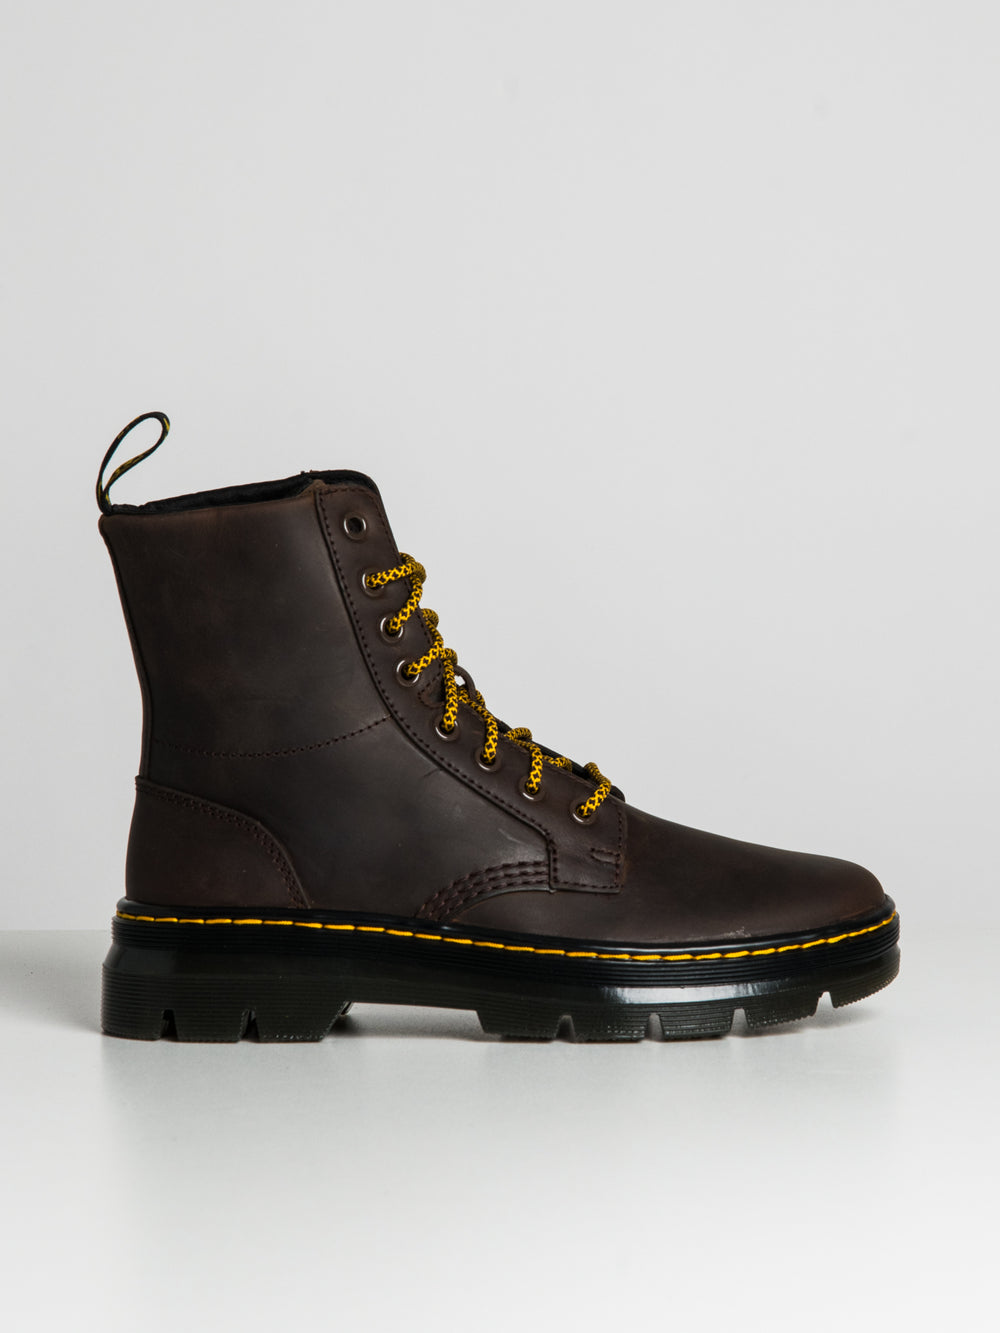 WOMENS DR MARTENS COMBS LEATHER CRAZY HORSE BOOT